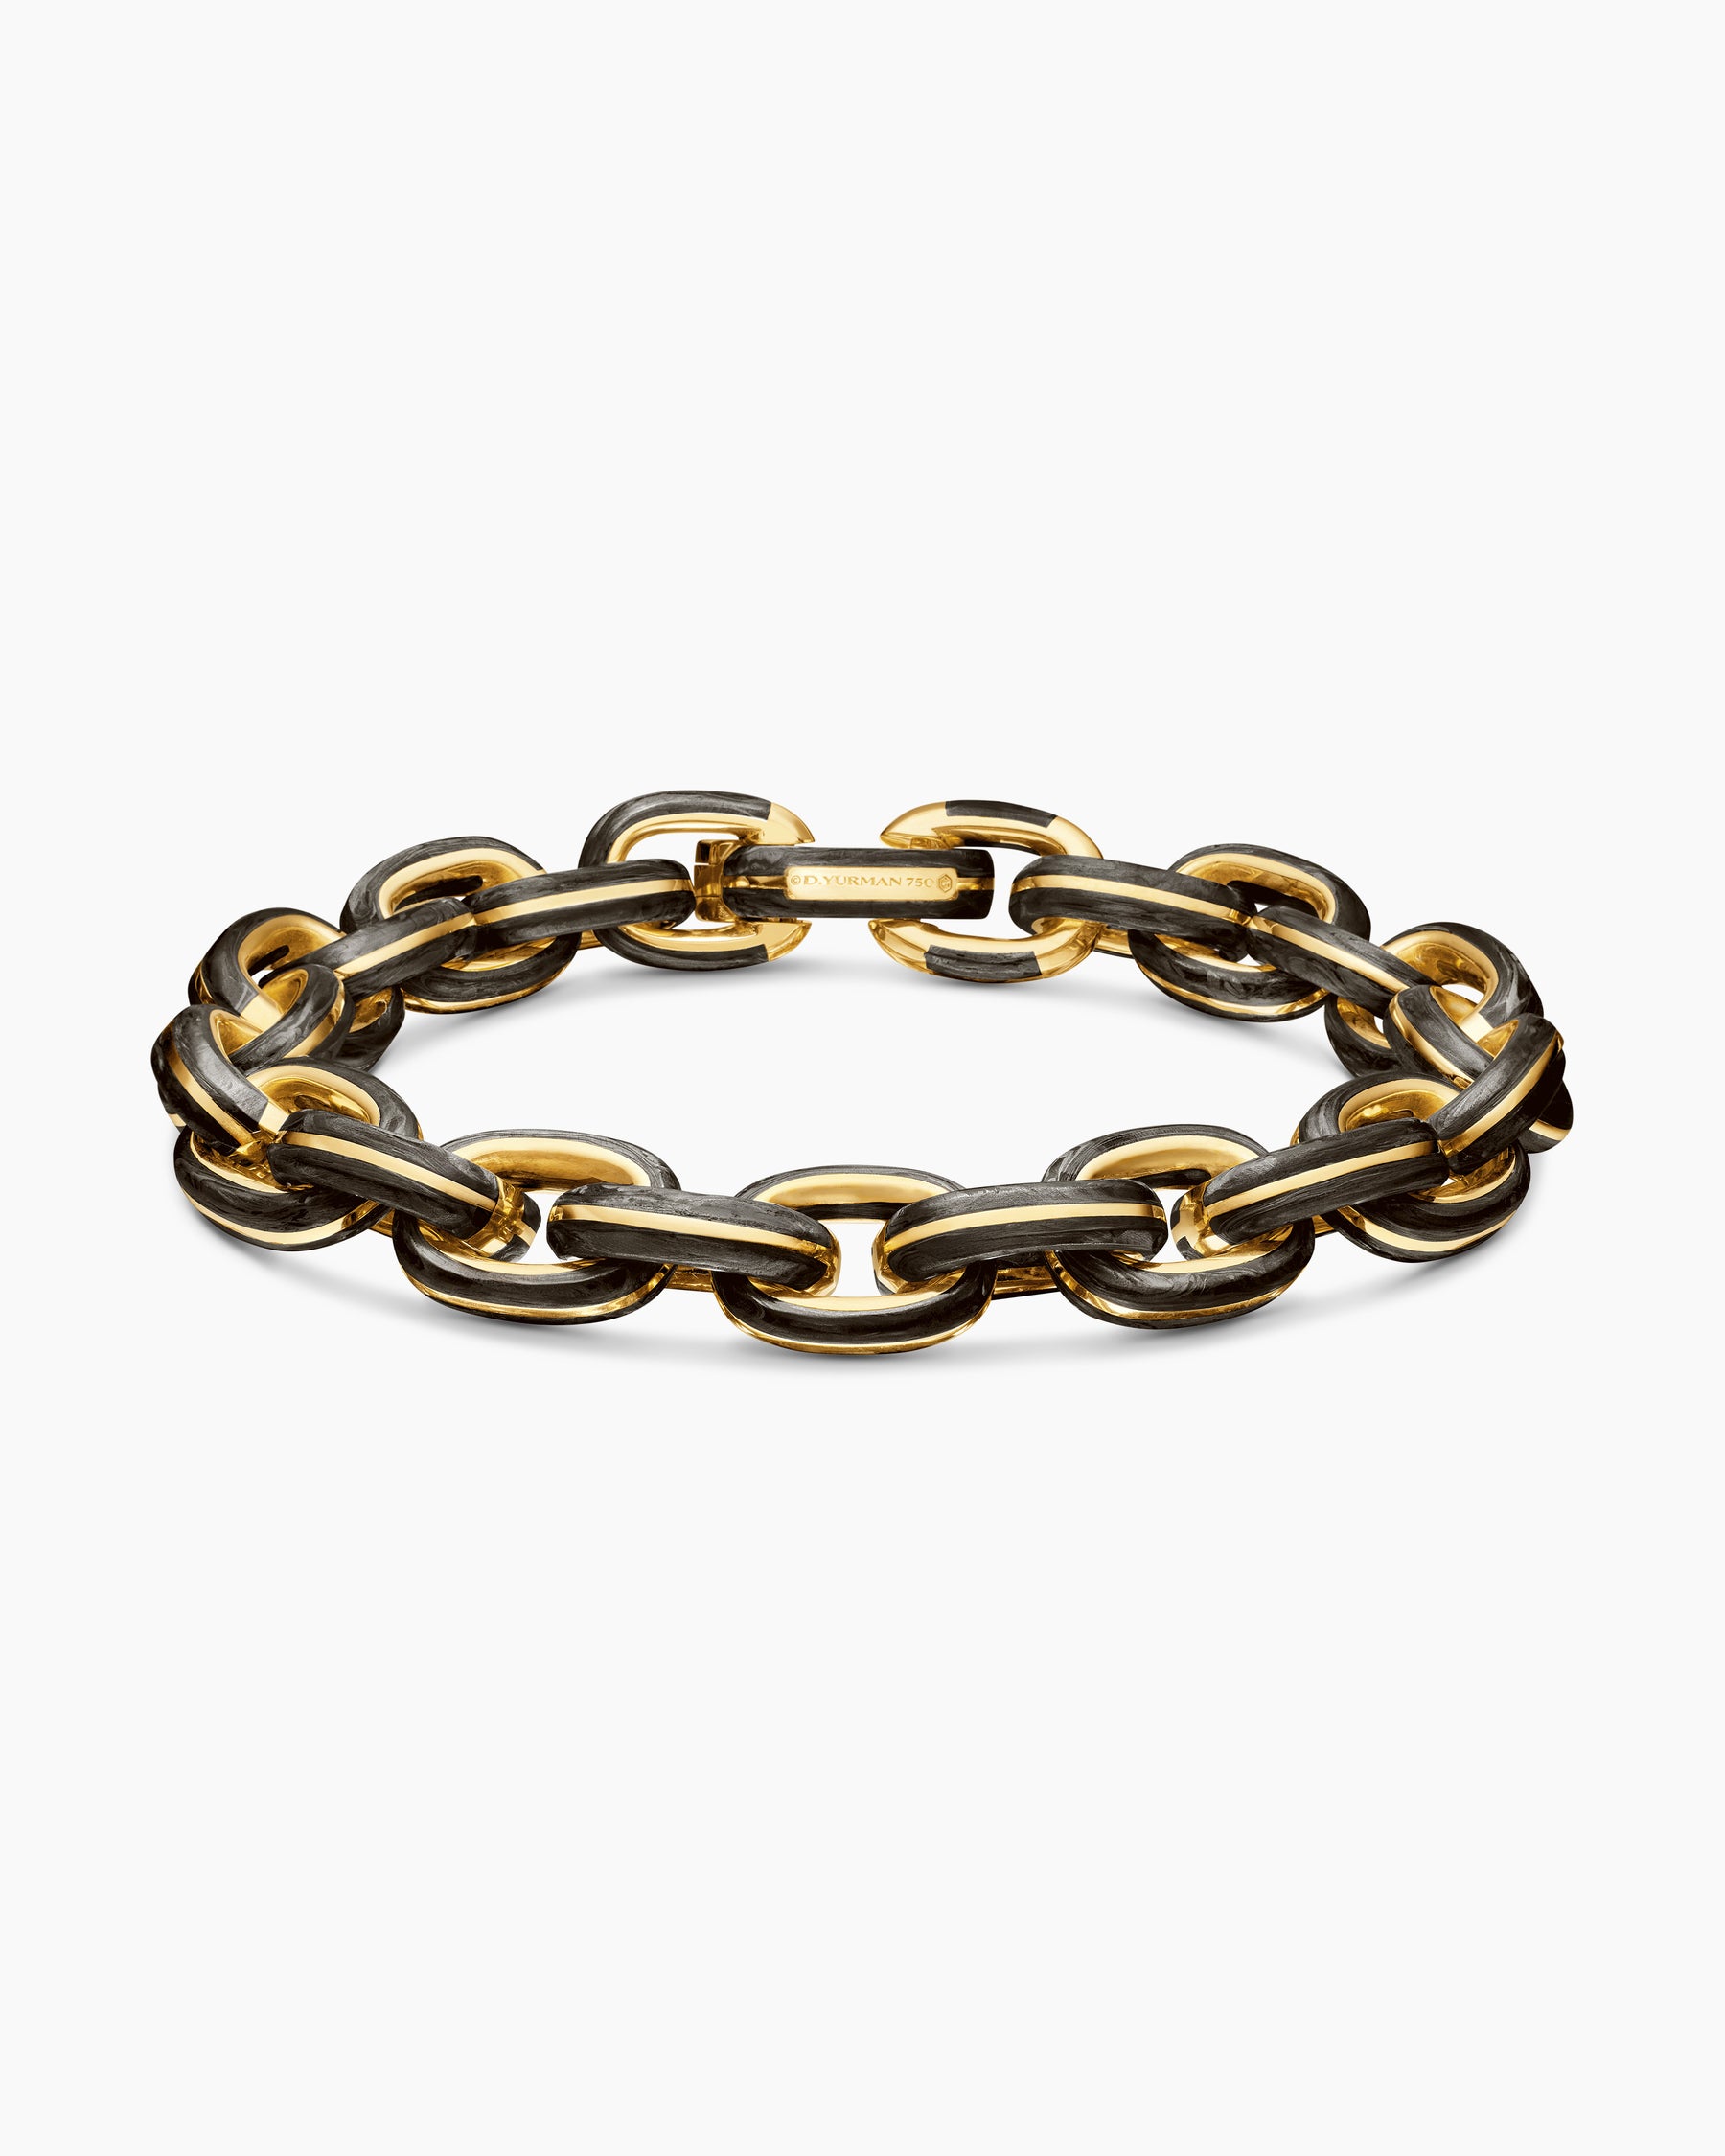 Mens Forged Carbon Link Bracelet in 18K Yellow Gold, 11mm